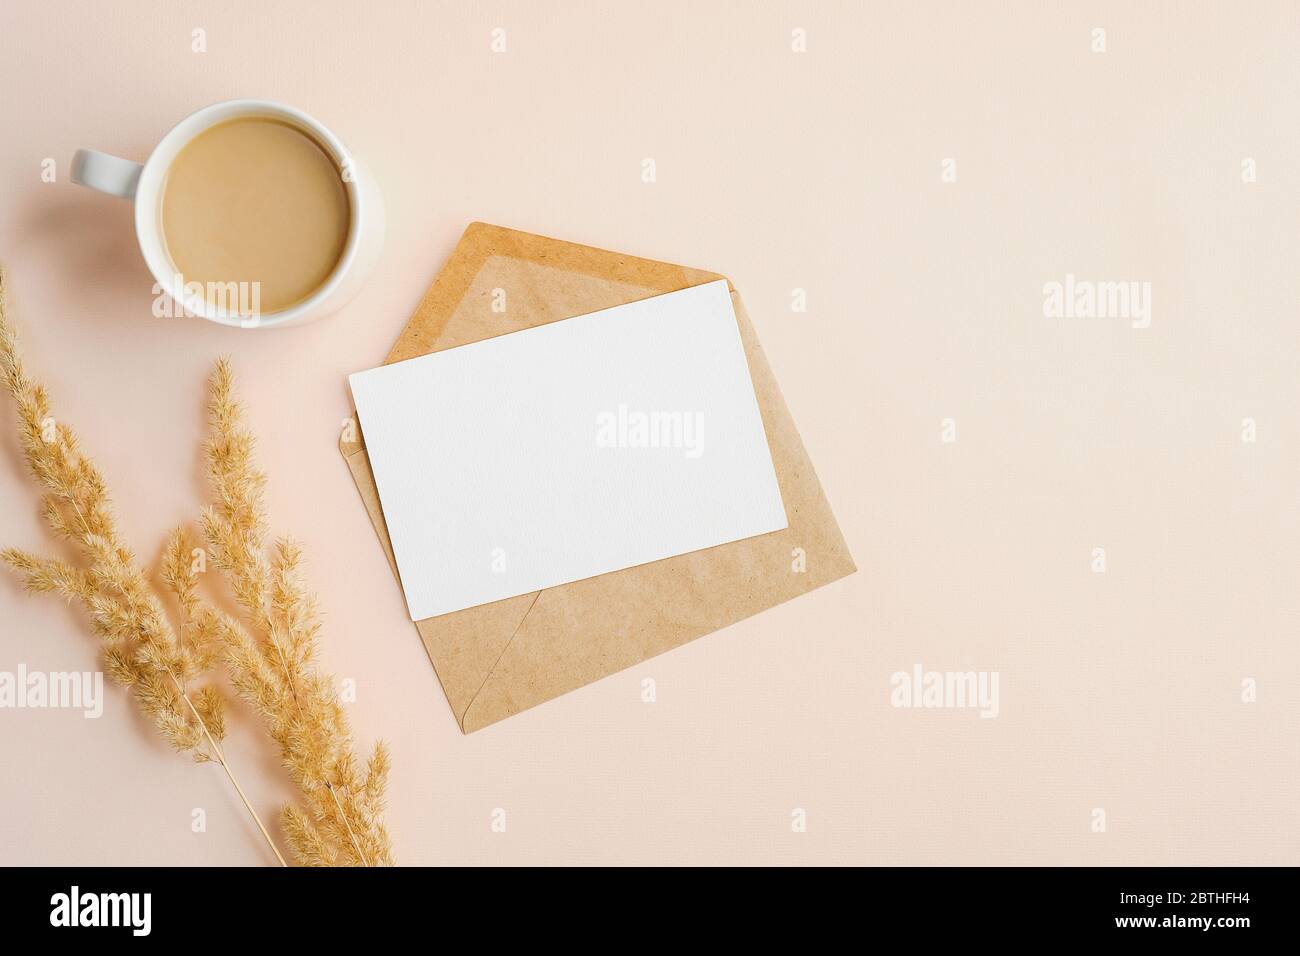 Kraft Paper Envelope With Blank Wedding Invitation Card Mockup Cup Of Coffee And Dry Flowers On Beige Background Flat Lay Top View Stock Photo Alamy